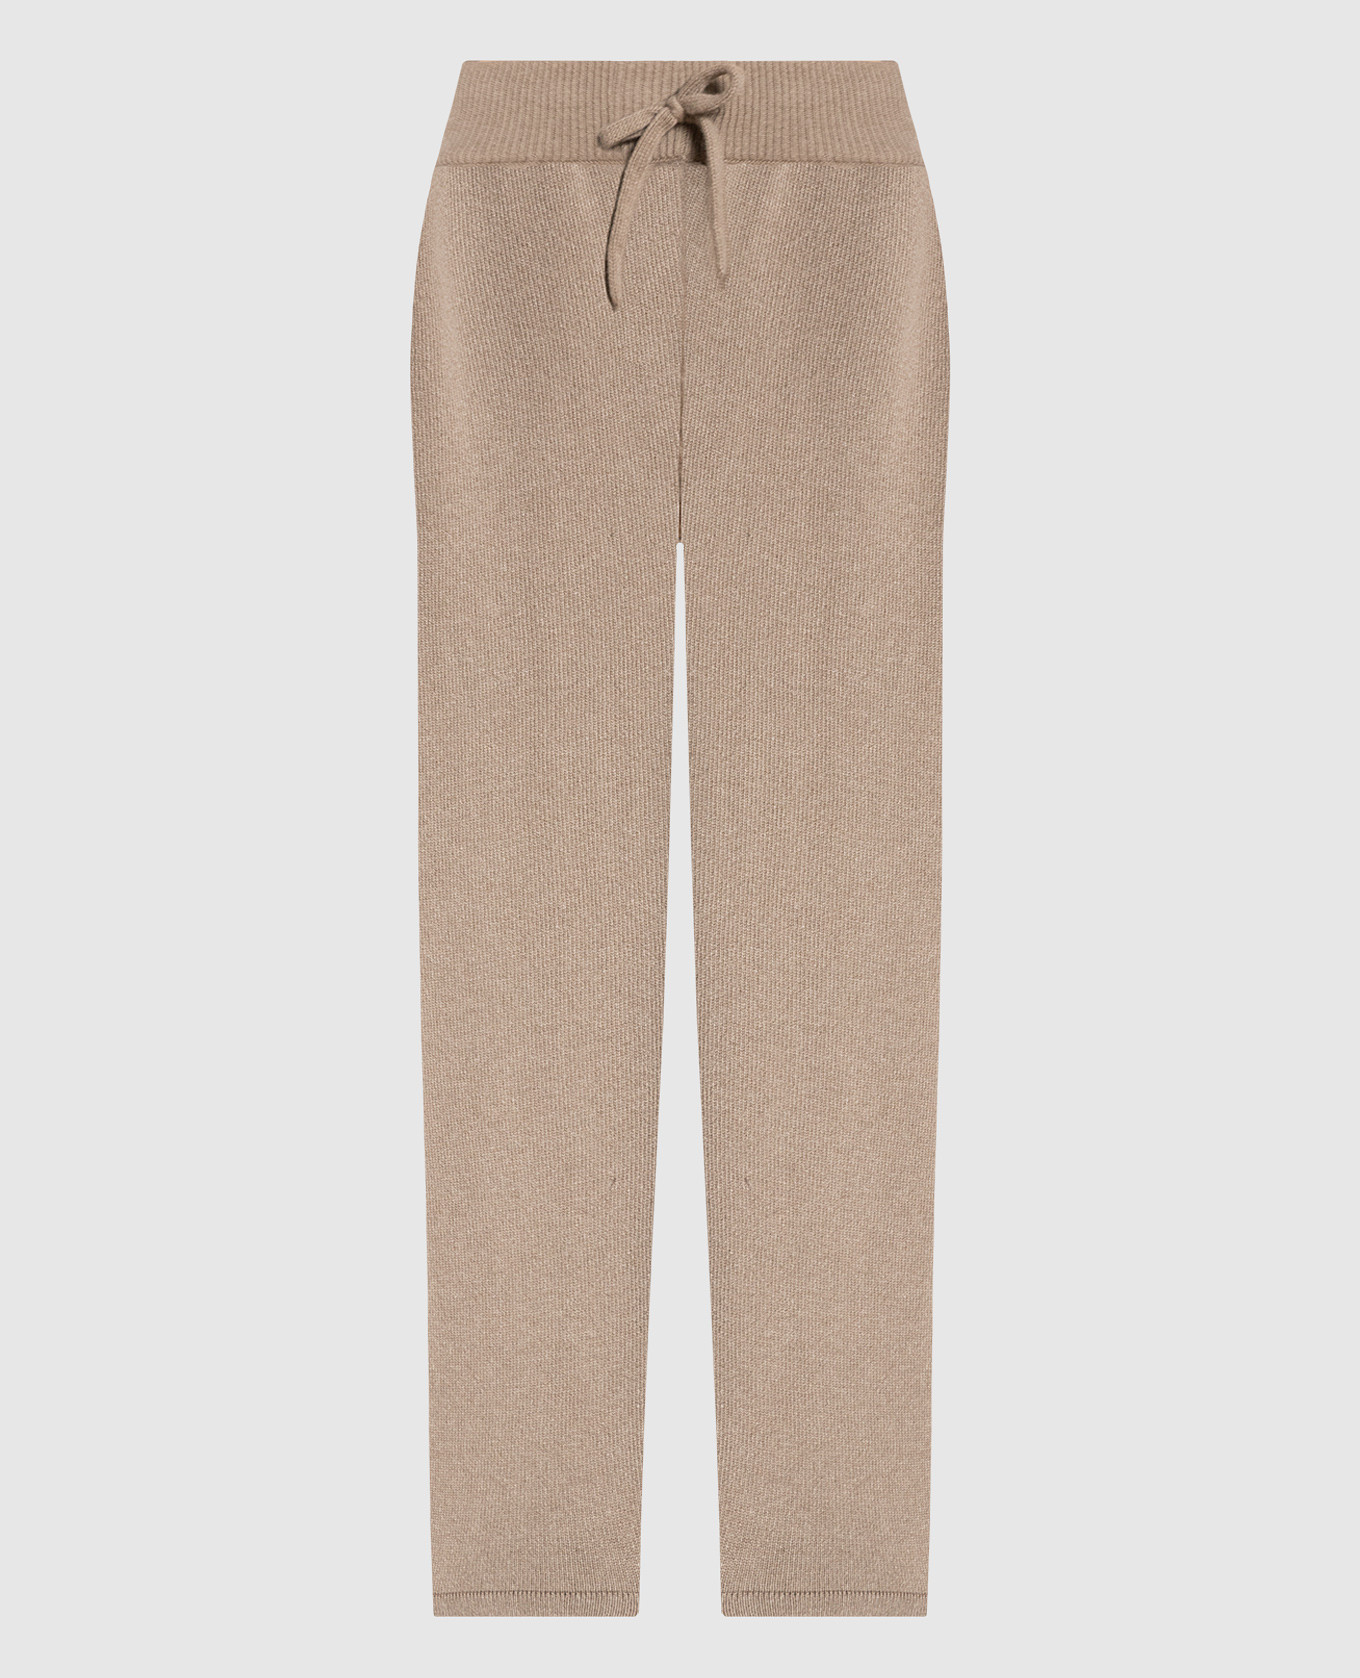 Lia brown wool and cashmere pants